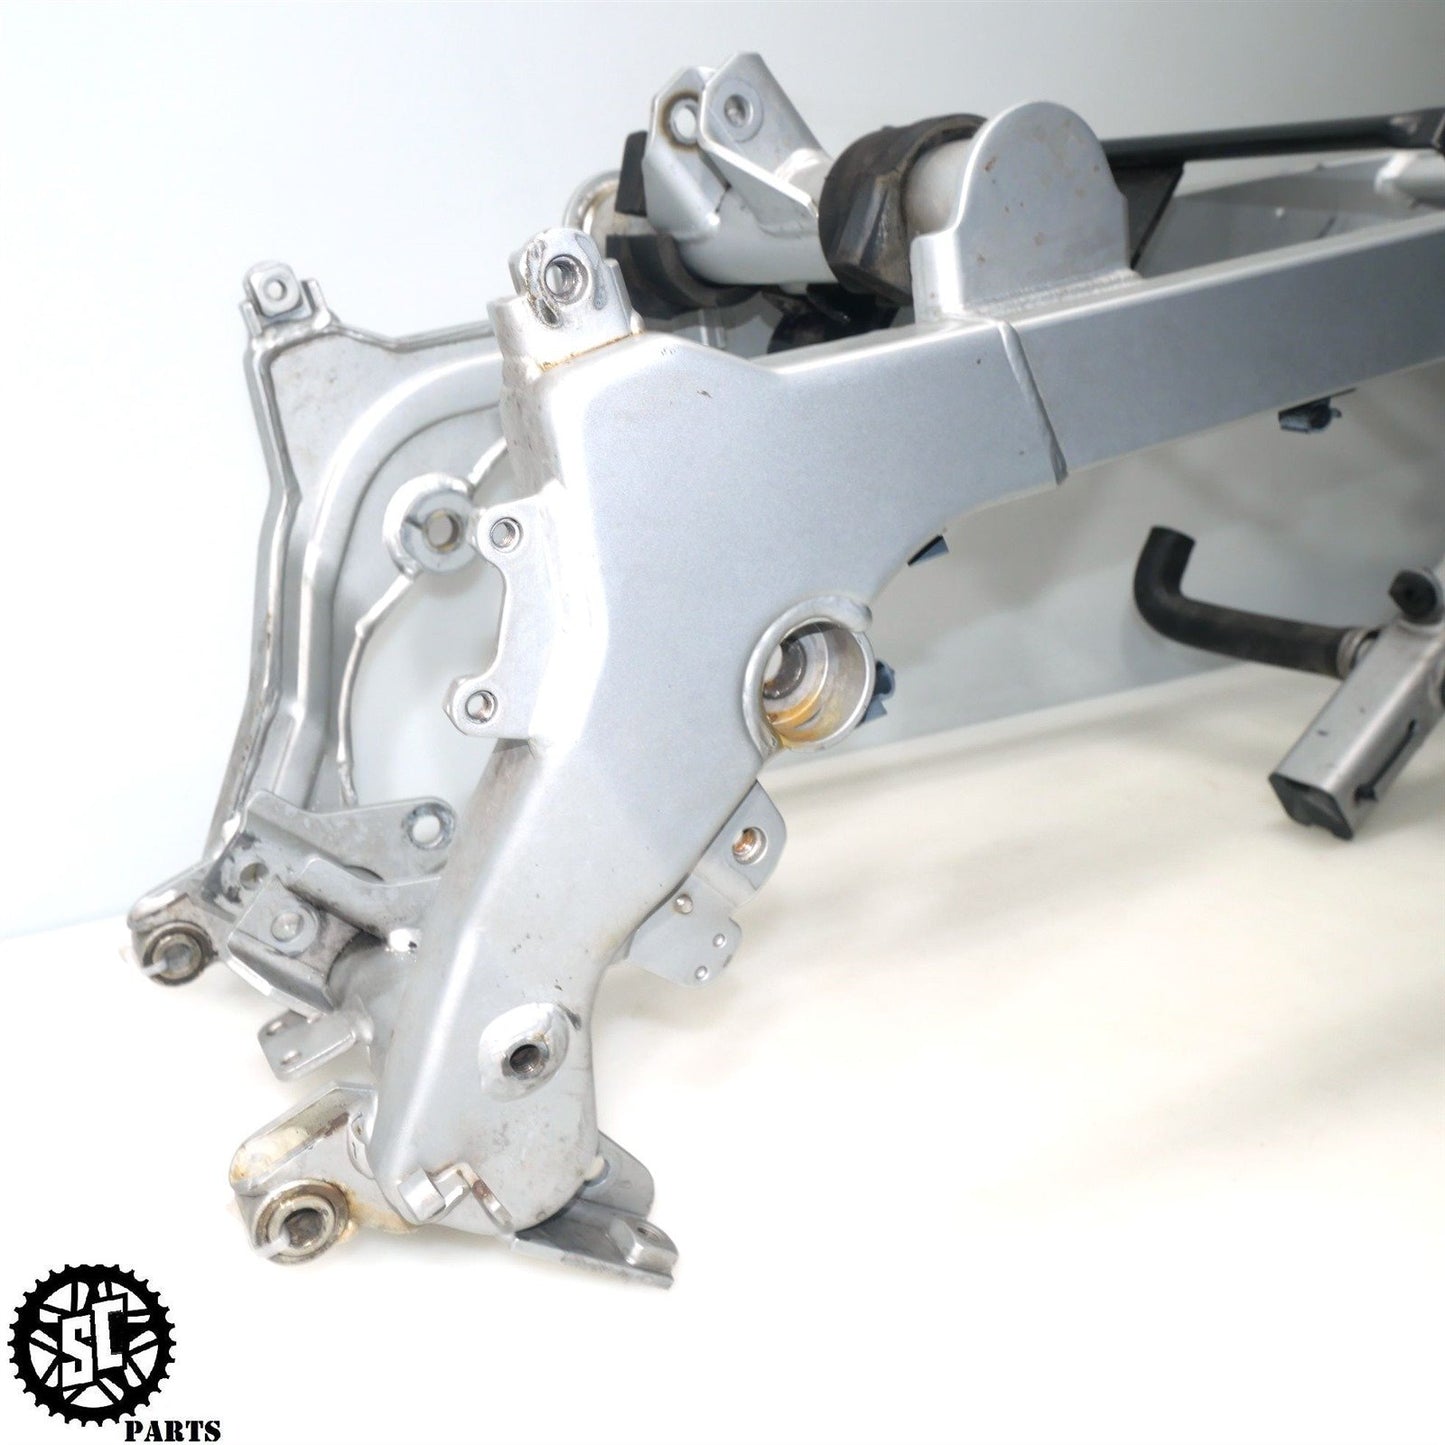 2001-2004 BMW F650GS FRAME CHASSIS *C* B17